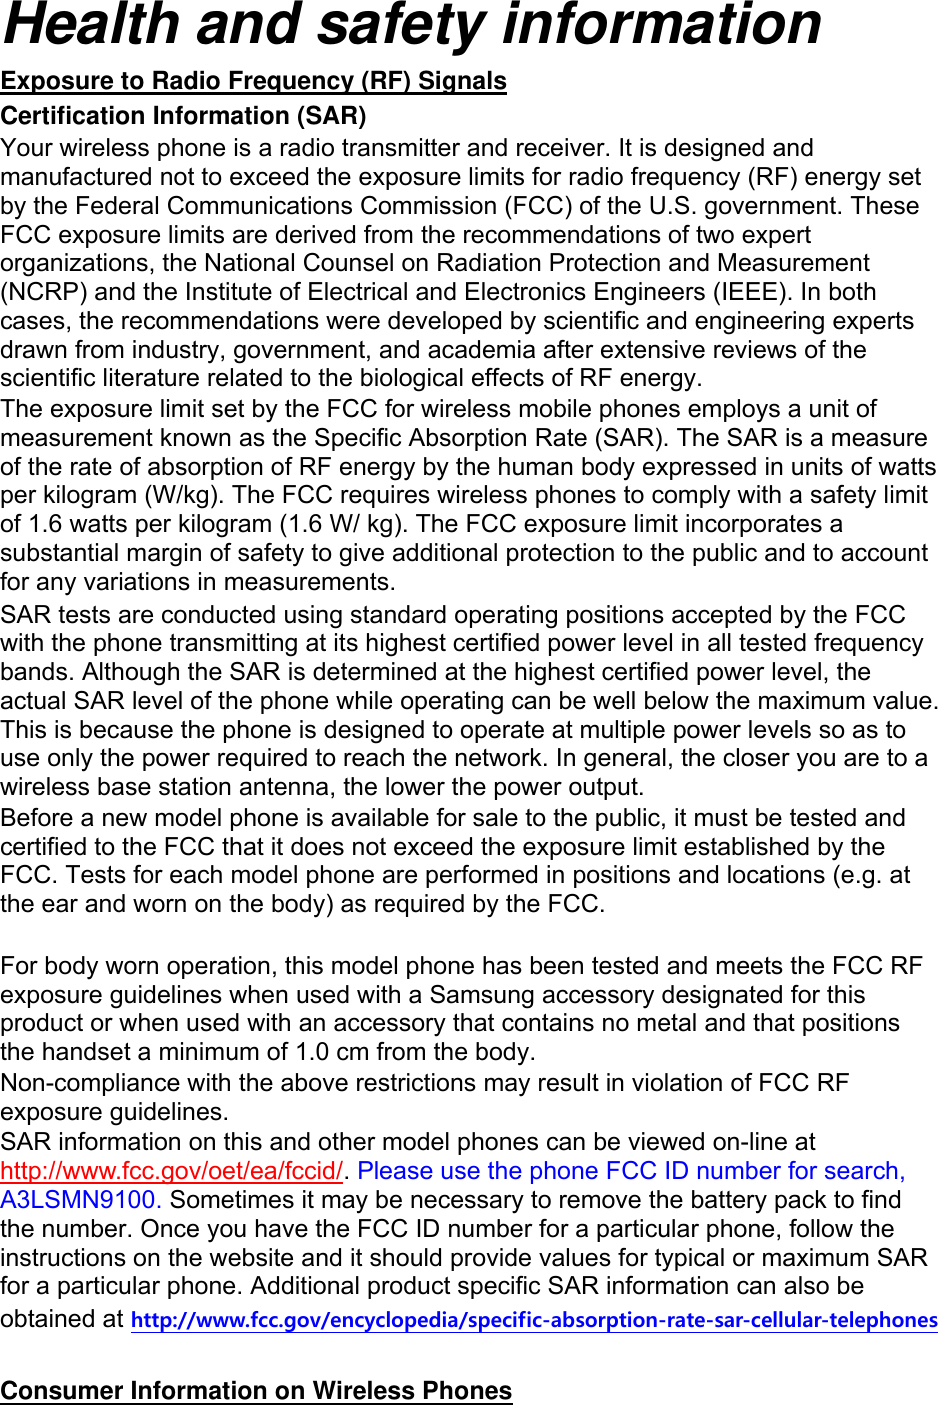 Health and safety information Exposure to Radio Frequency (RF) Signals Certification Information (SAR) Your wireless phone is a radio transmitter and receiver. It is designed and manufactured not to exceed the exposure limits for radio frequency (RF) energy set by the Federal Communications Commission (FCC) of the U.S. government. These FCC exposure limits are derived from the recommendations of two expert organizations, the National Counsel on Radiation Protection and Measurement (NCRP) and the Institute of Electrical and Electronics Engineers (IEEE). In both cases, the recommendations were developed by scientific and engineering experts drawn from industry, government, and academia after extensive reviews of the scientific literature related to the biological effects of RF energy. The exposure limit set by the FCC for wireless mobile phones employs a unit of measurement known as the Specific Absorption Rate (SAR). The SAR is a measure of the rate of absorption of RF energy by the human body expressed in units of watts per kilogram (W/kg). The FCC requires wireless phones to comply with a safety limit of 1.6 watts per kilogram (1.6 W/ kg). The FCC exposure limit incorporates a substantial margin of safety to give additional protection to the public and to account for any variations in measurements. SAR tests are conducted using standard operating positions accepted by the FCC with the phone transmitting at its highest certified power level in all tested frequency bands. Although the SAR is determined at the highest certified power level, the actual SAR level of the phone while operating can be well below the maximum value. This is because the phone is designed to operate at multiple power levels so as to use only the power required to reach the network. In general, the closer you are to a wireless base station antenna, the lower the power output. Before a new model phone is available for sale to the public, it must be tested and certified to the FCC that it does not exceed the exposure limit established by the FCC. Tests for each model phone are performed in positions and locations (e.g. at the ear and worn on the body) as required by the FCC.      For body worn operation, this model phone has been tested and meets the FCC RF exposure guidelines when used with a Samsung accessory designated for this product or when used with an accessory that contains no metal and that positions the handset a minimum of 1.0 cm from the body.   Non-compliance with the above restrictions may result in violation of FCC RF exposure guidelines. SAR information on this and other model phones can be viewed on-line at http://www.fcc.gov/oet/ea/fccid/. Please use the phone FCC ID number for search, A3LSMN9100. Sometimes it may be necessary to remove the battery pack to find the number. Once you have the FCC ID number for a particular phone, follow the instructions on the website and it should provide values for typical or maximum SAR for a particular phone. Additional product specific SAR information can also be obtained at http://www.fcc.gov/encyclopedia/specific-absorption-rate-sar-cellular-telephones  Consumer Information on Wireless Phones 